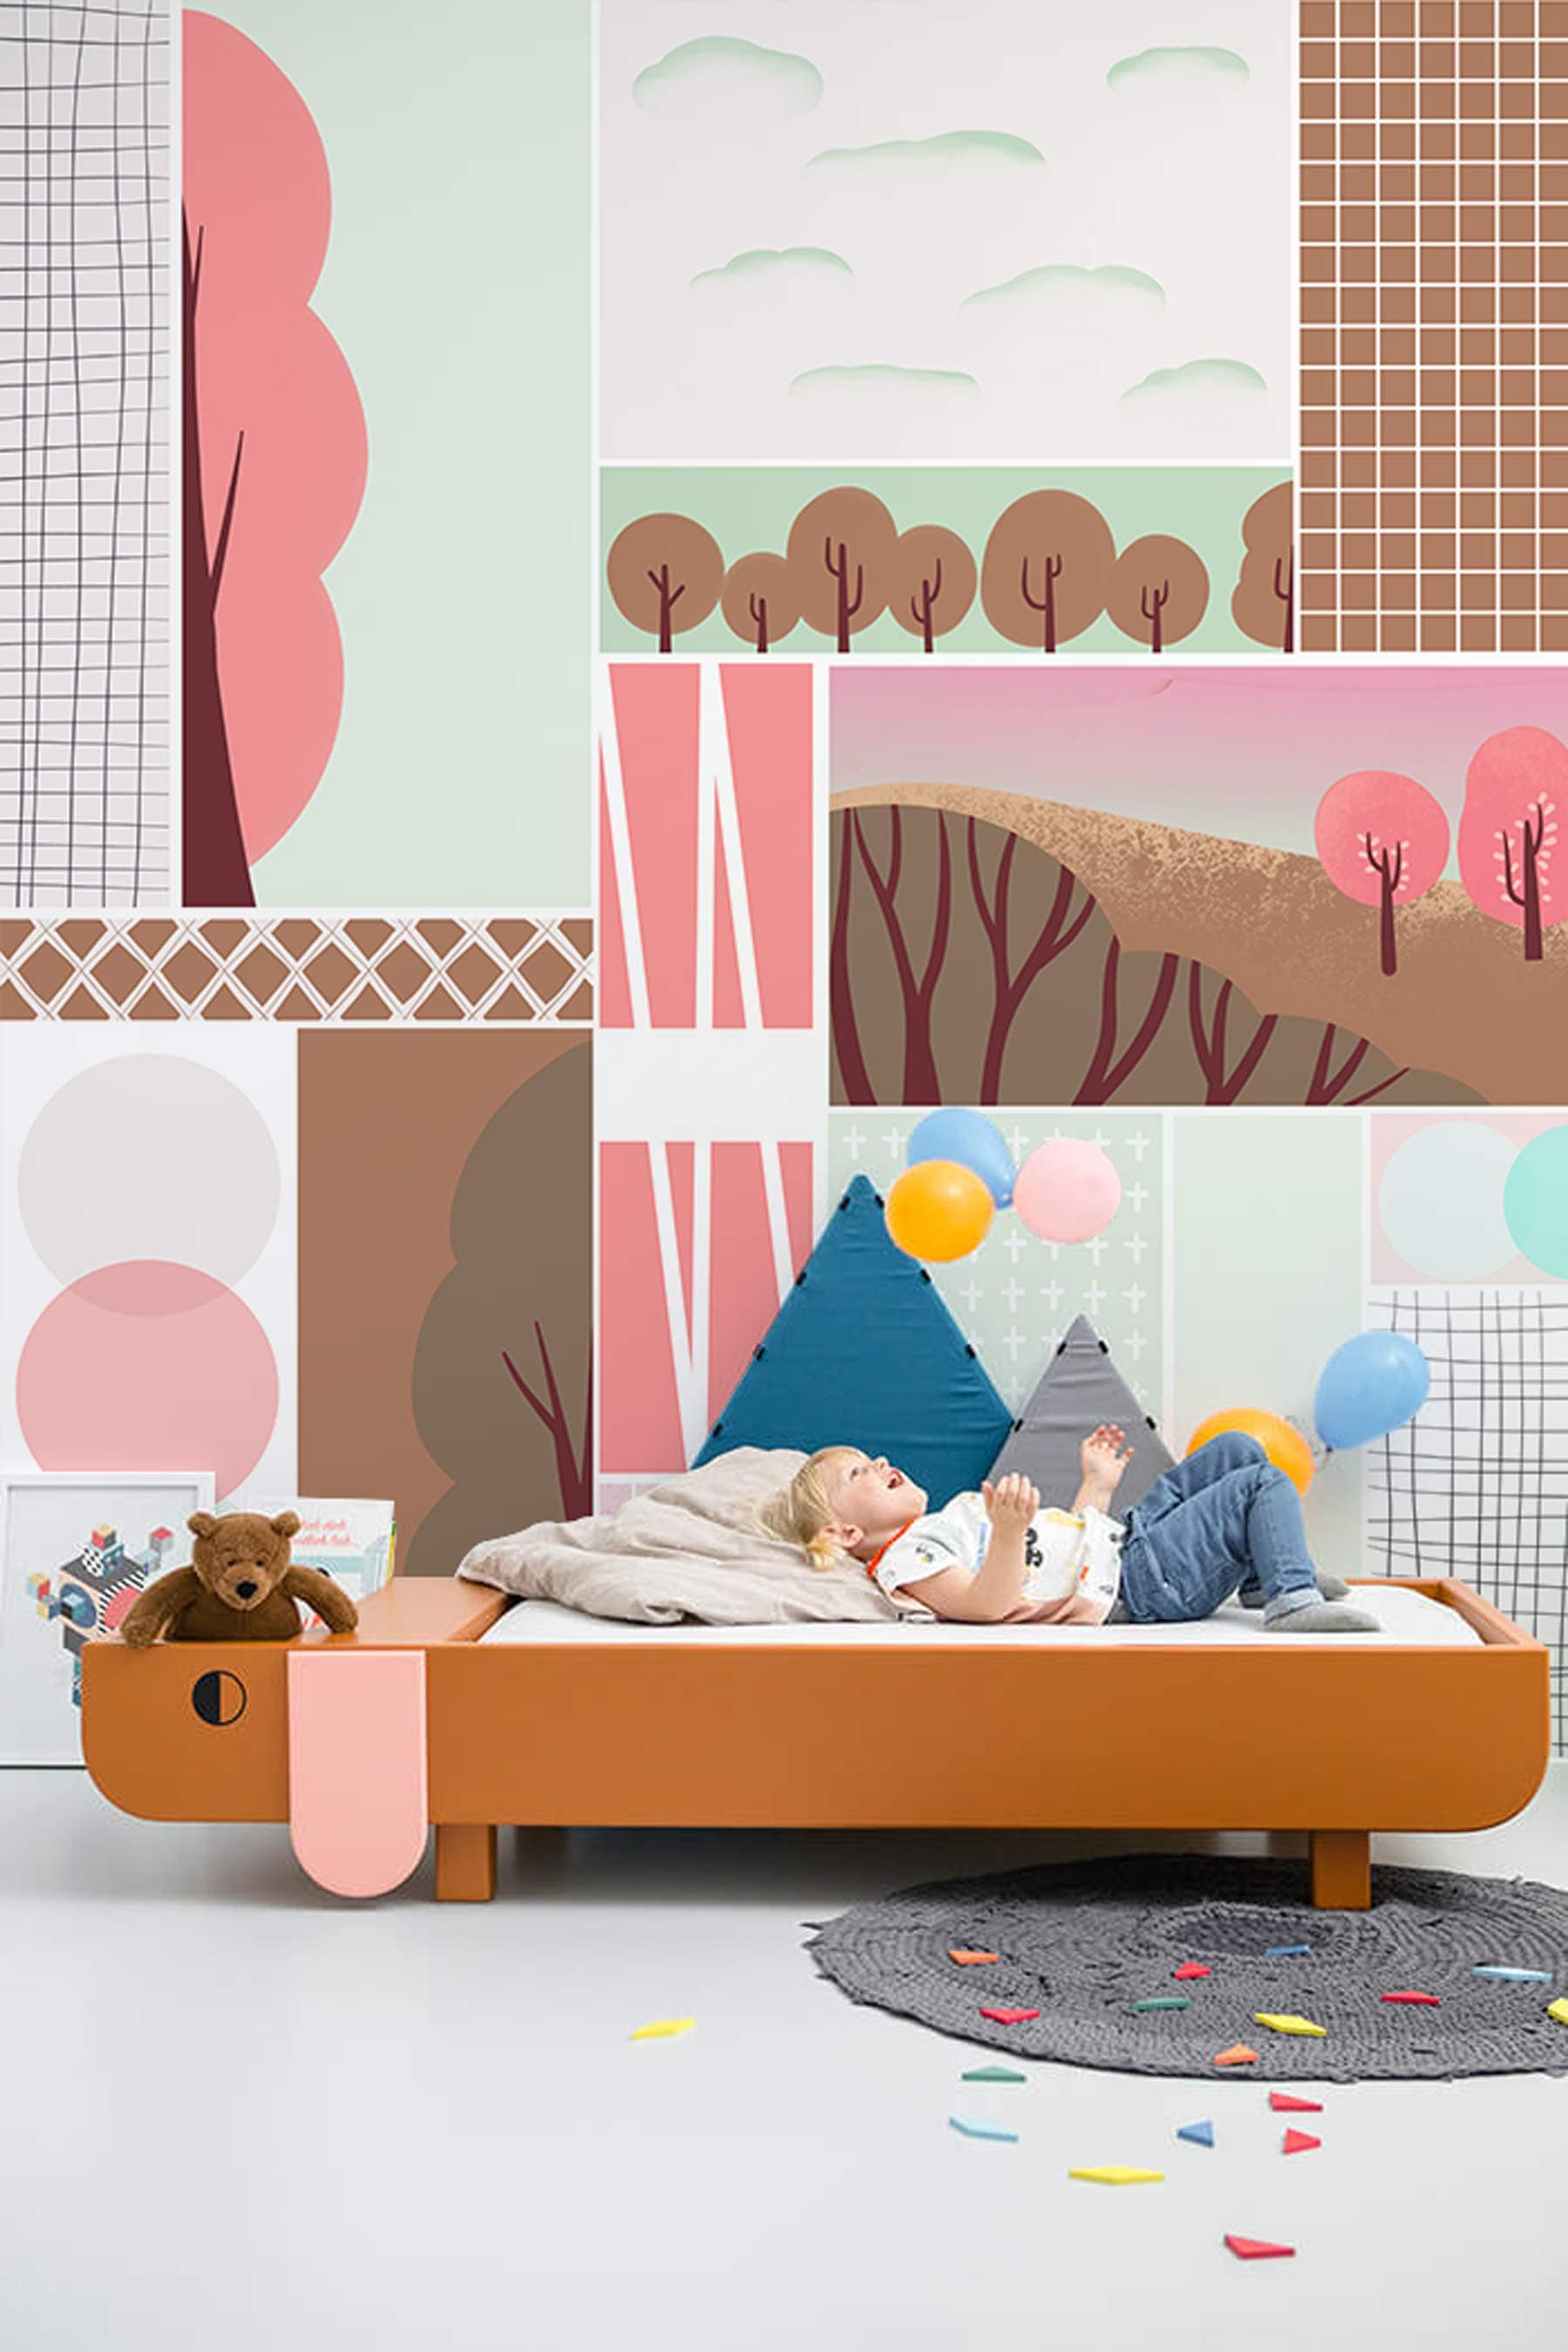 Wallpaper mural featuring a geometric combination pattern for use in decorating a bedroom